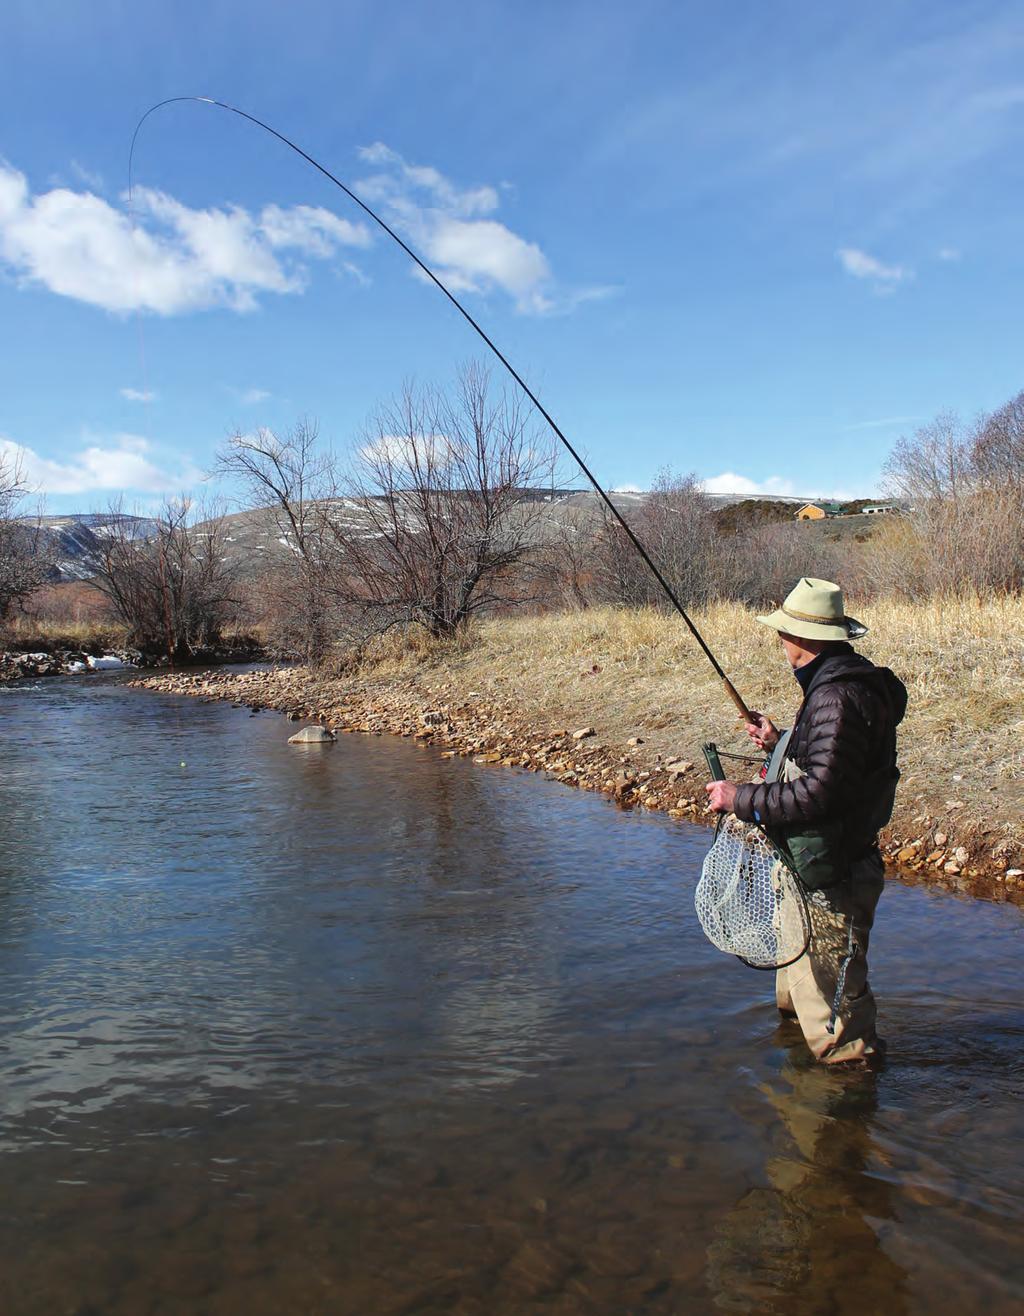 George Hunker guided the author, a perpetual fly-fishing beginner, to her first catch with tenkara, a